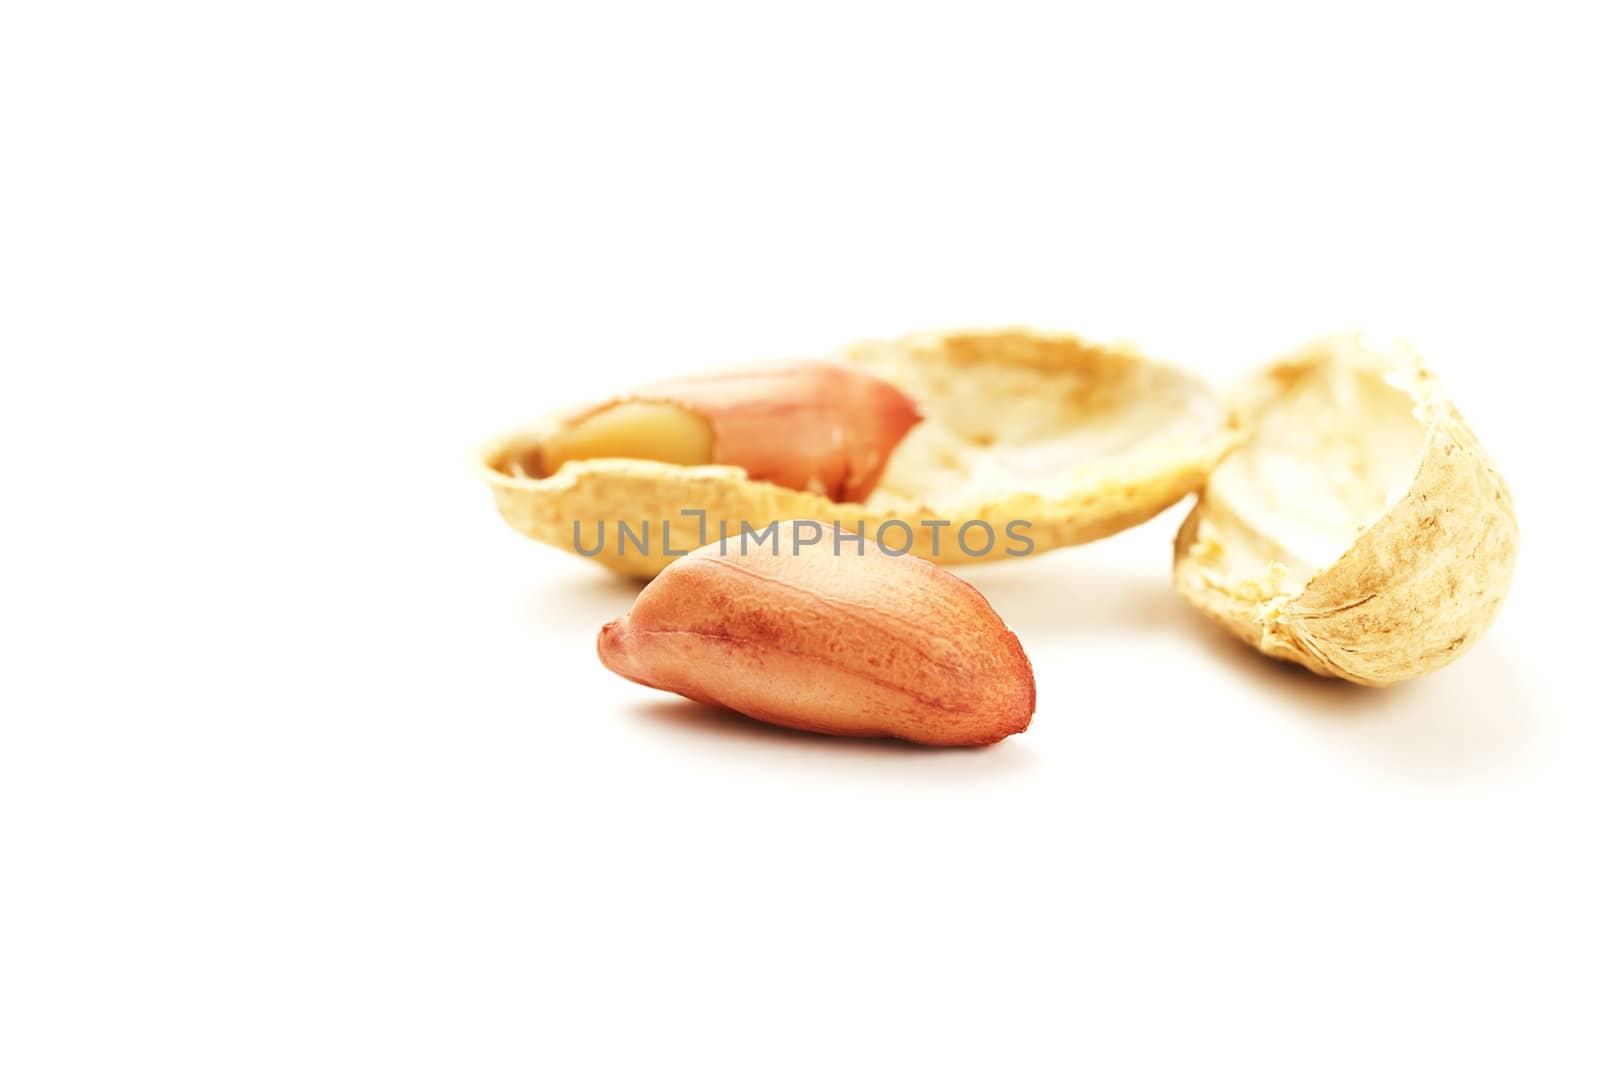 closeup of a peanut in front of shell and cracked shell on white background